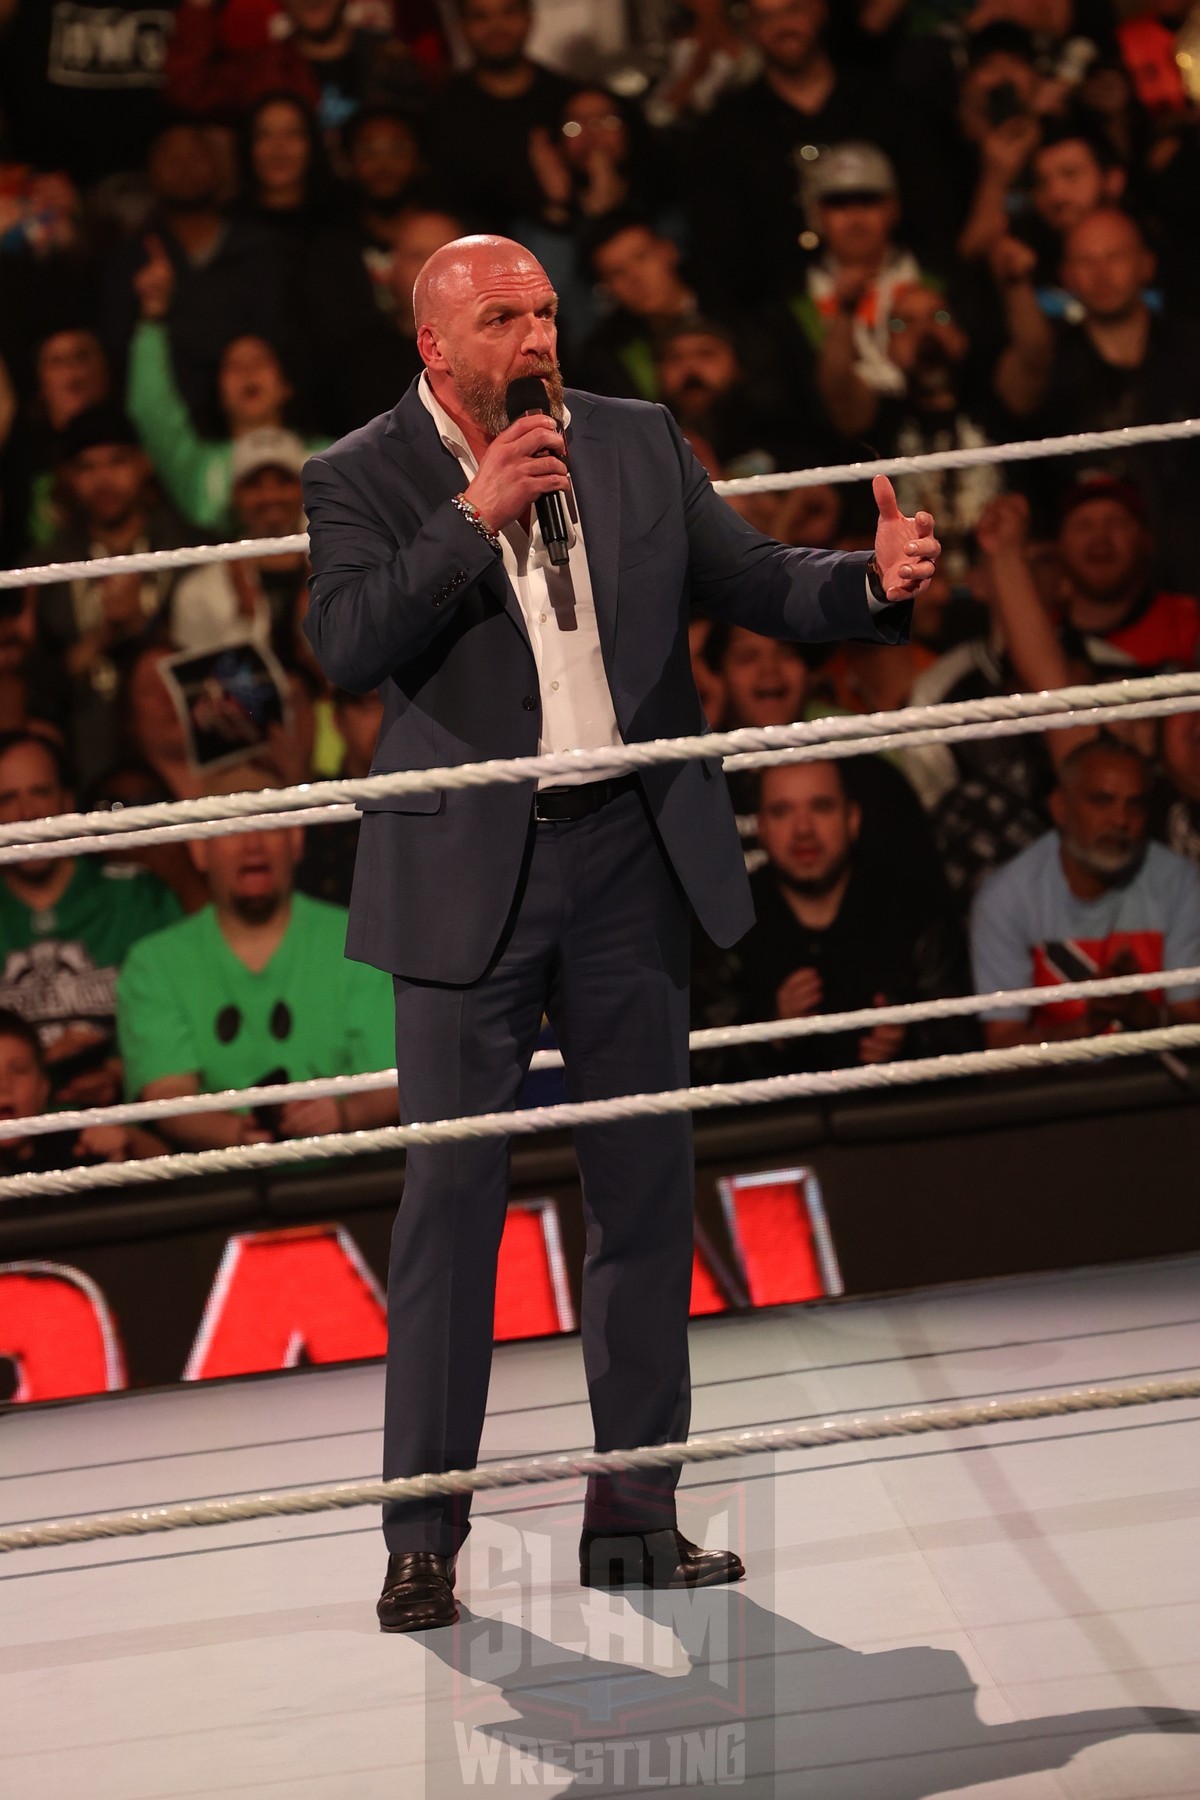 Triple H / Paul Levesque at WWE Monday Night Raw at the Wells Fargo Center in Philadelphia, PA, on April 8, 2024. Photo by George Tahinos, georgetahinos.smugmug.com